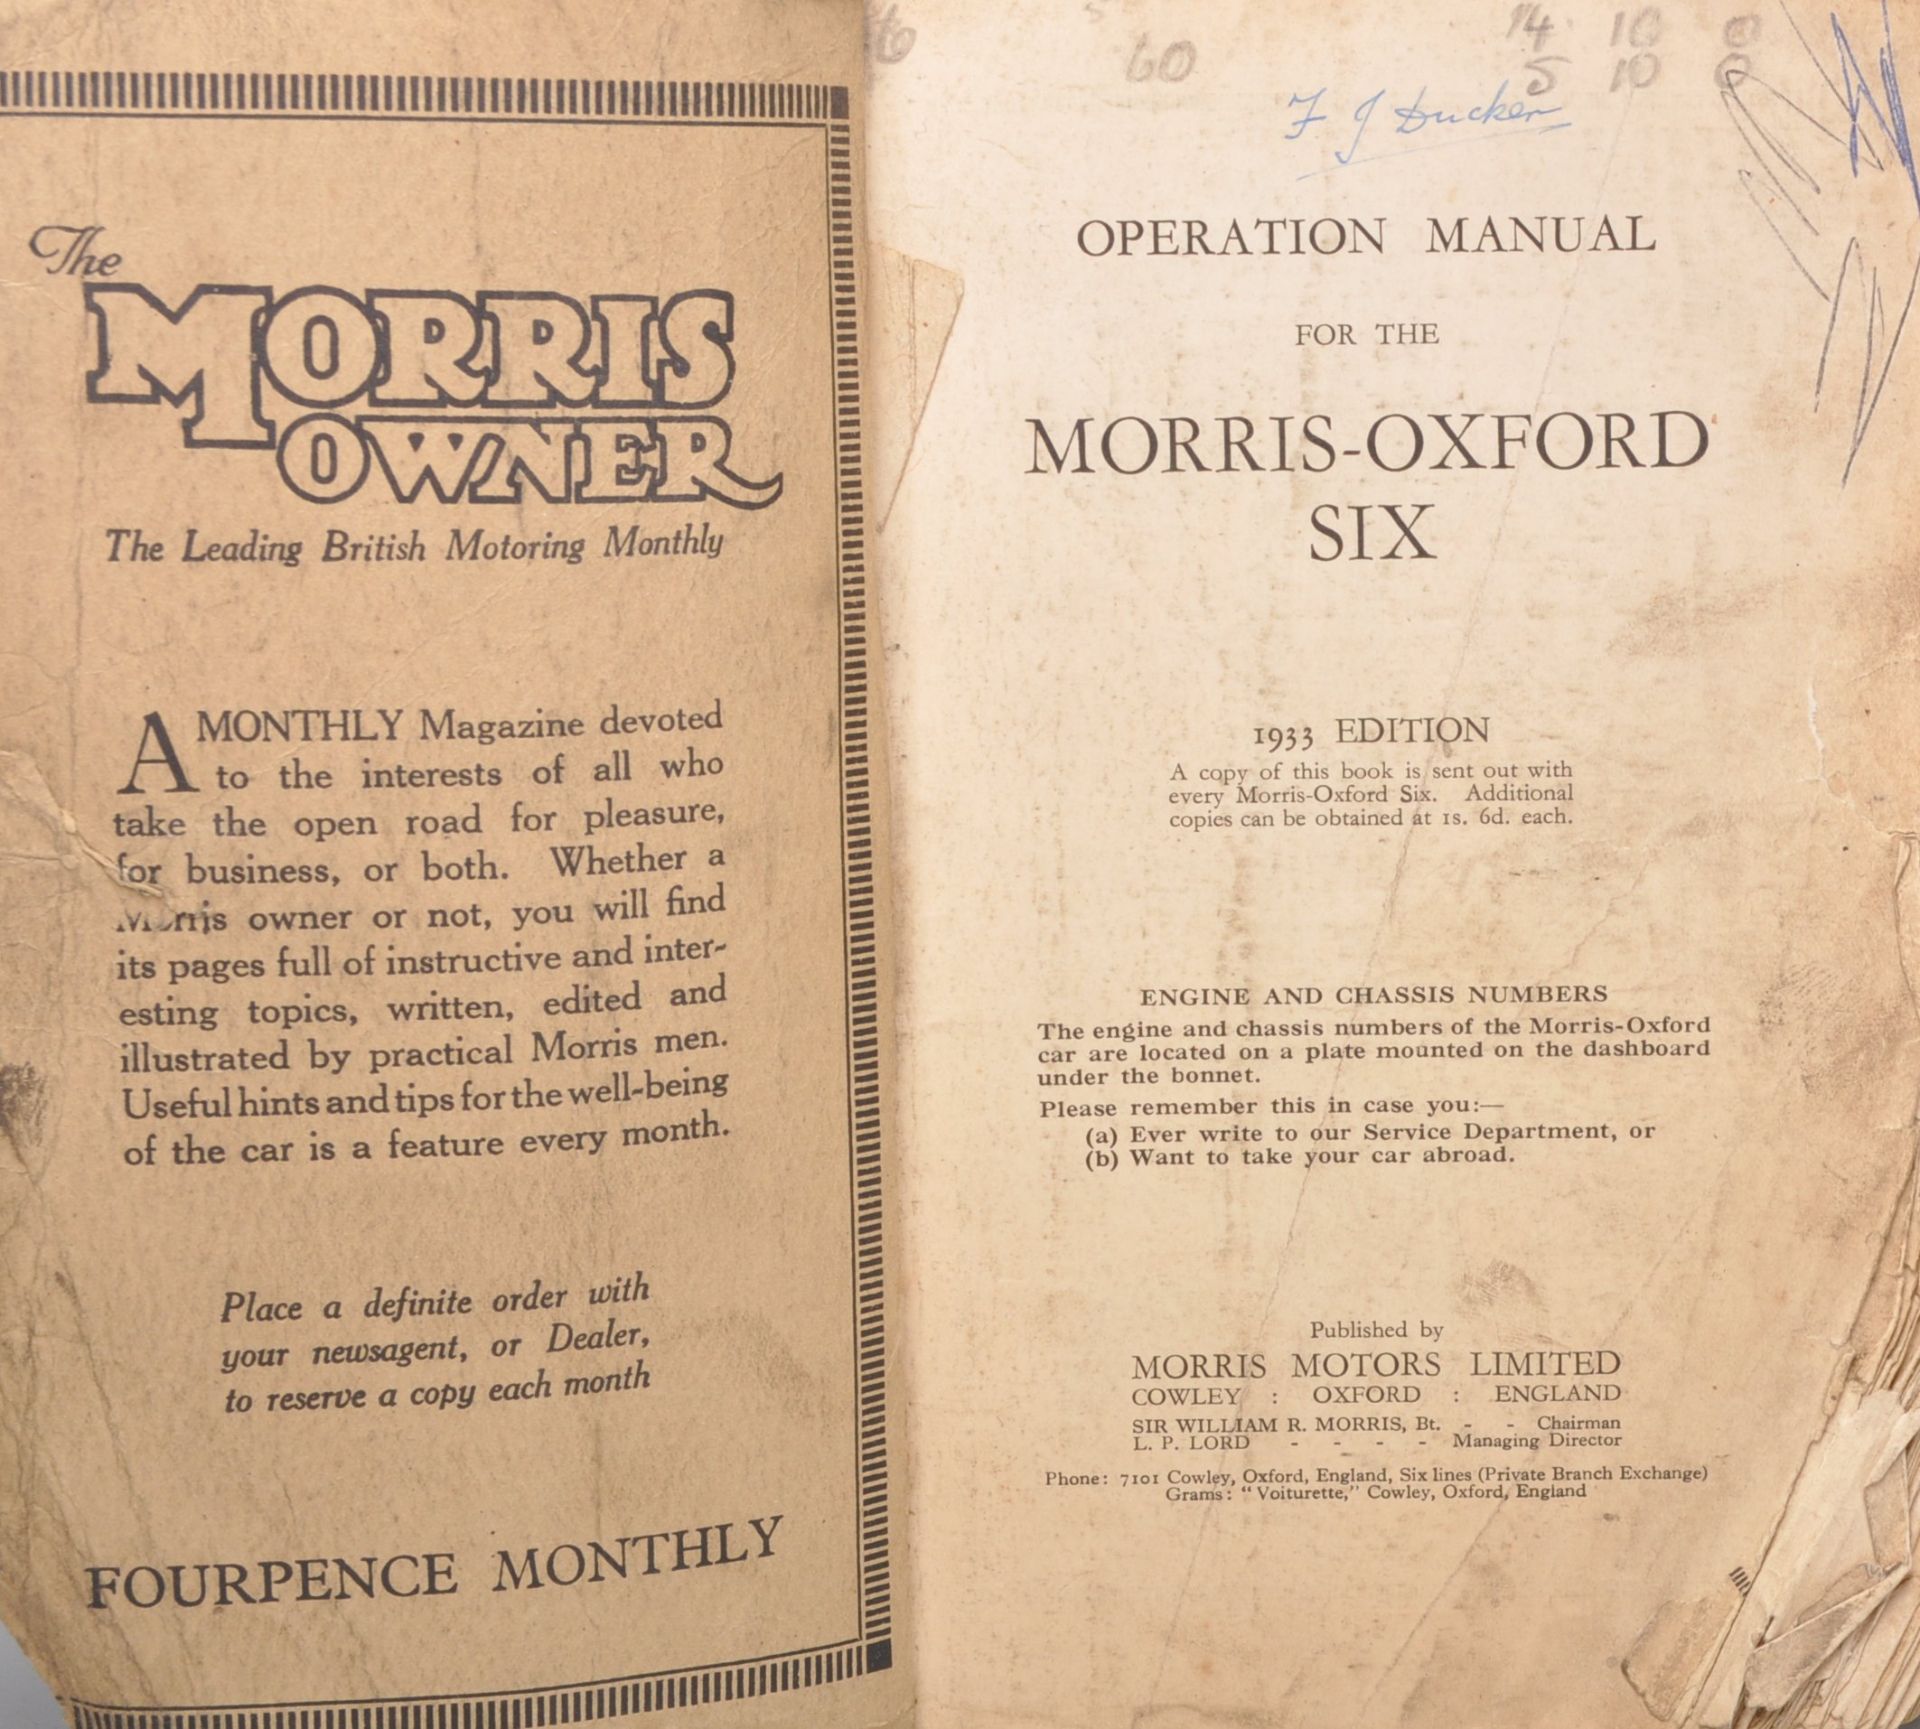 Motoring - A Operation Manual for a Morris-Oxford Six. 1933 edition. - Image 2 of 4